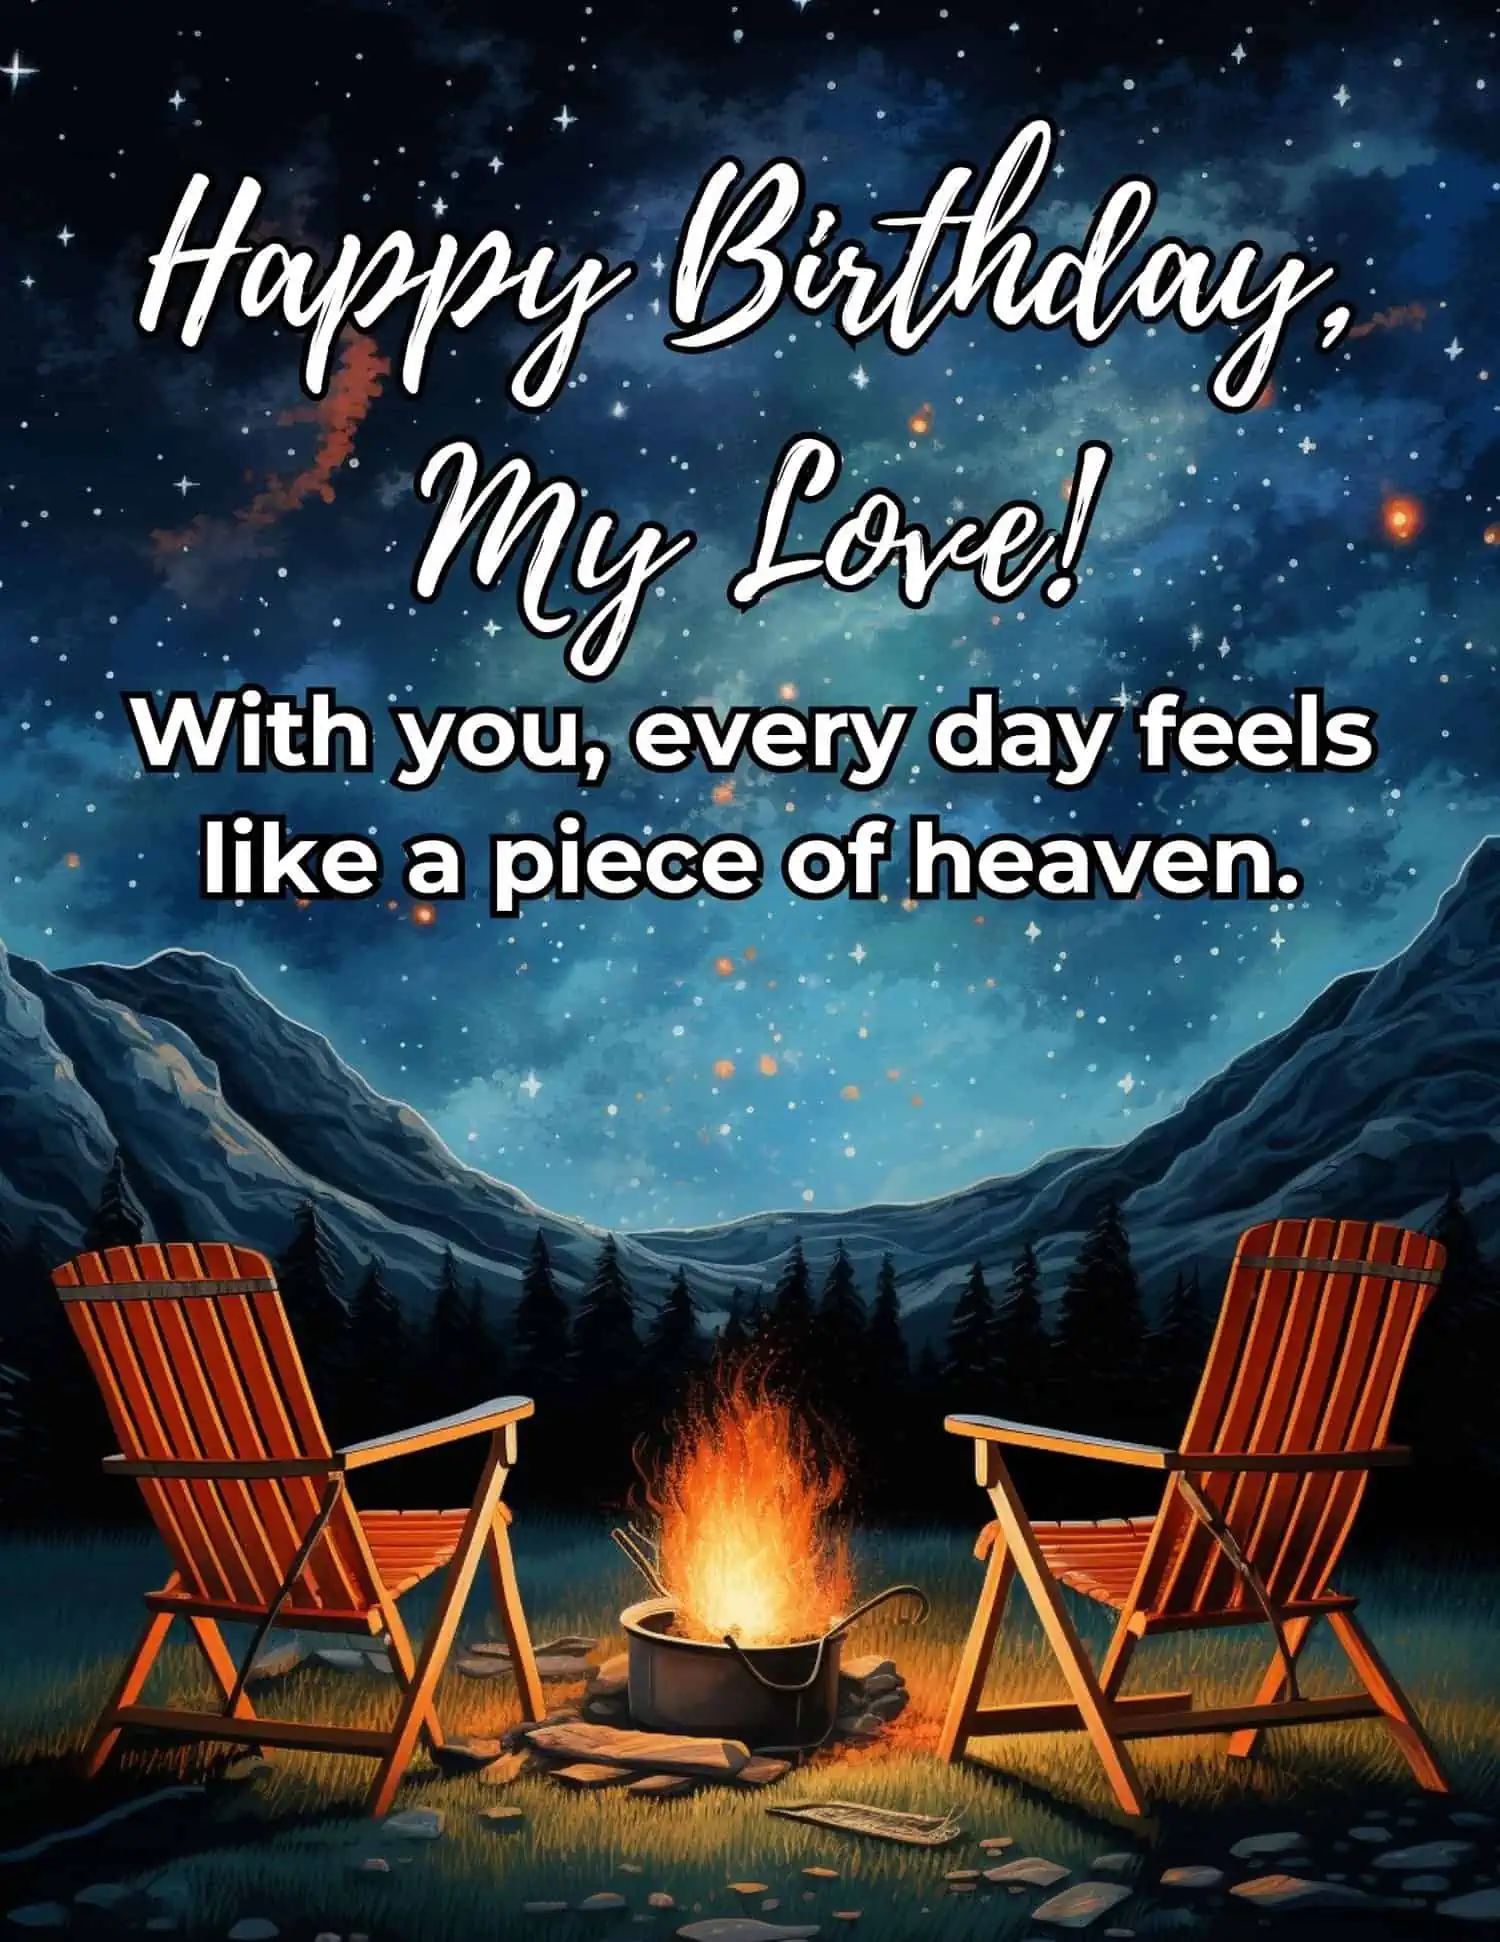 A collection of heartfelt and romantic birthday wishes for your husband.